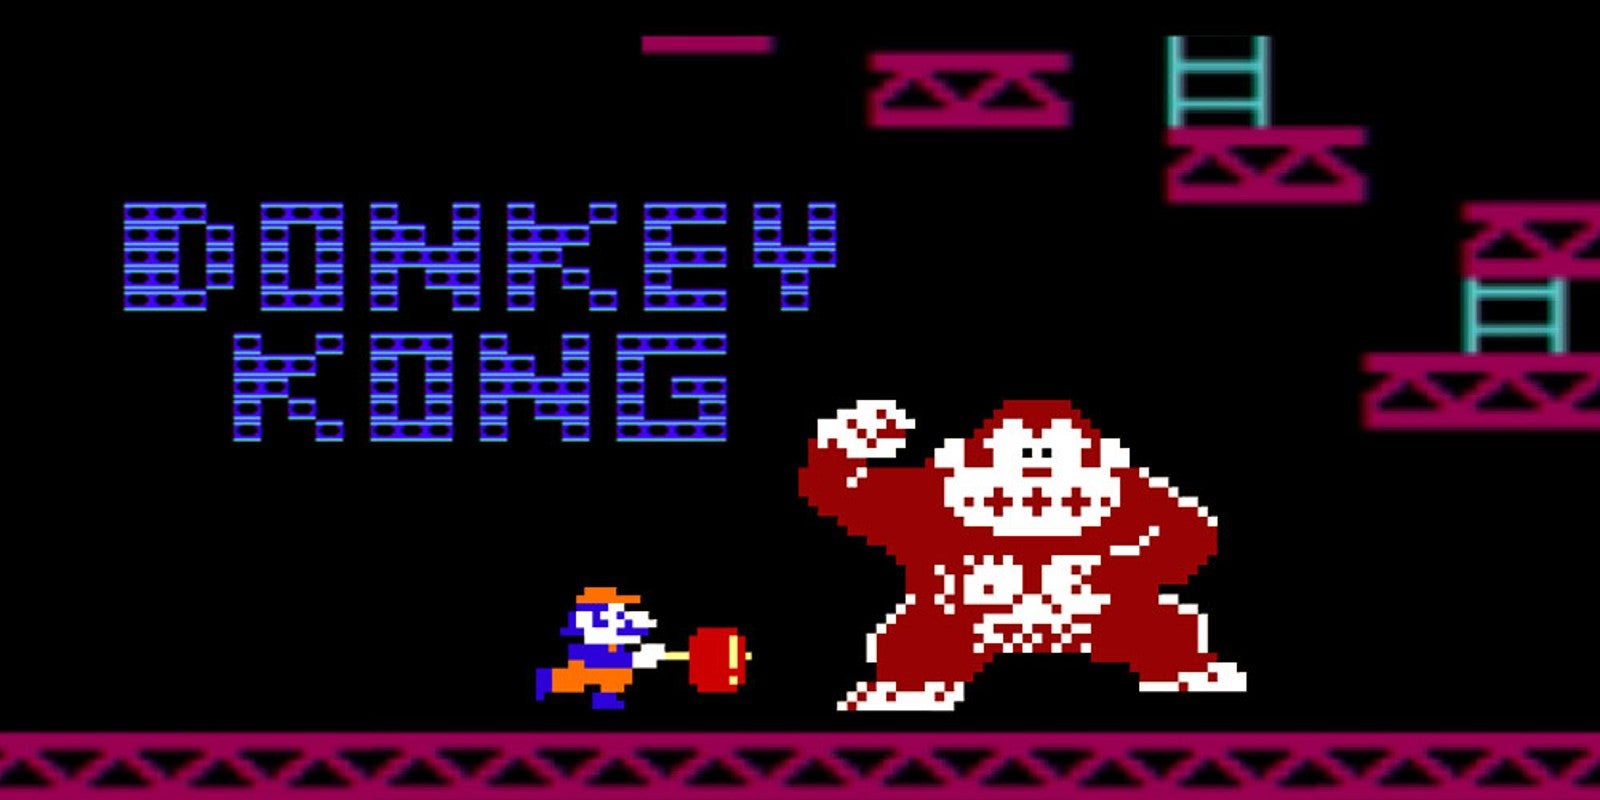 Image for Disgraced Donkey Kong champ denies cheating allegations